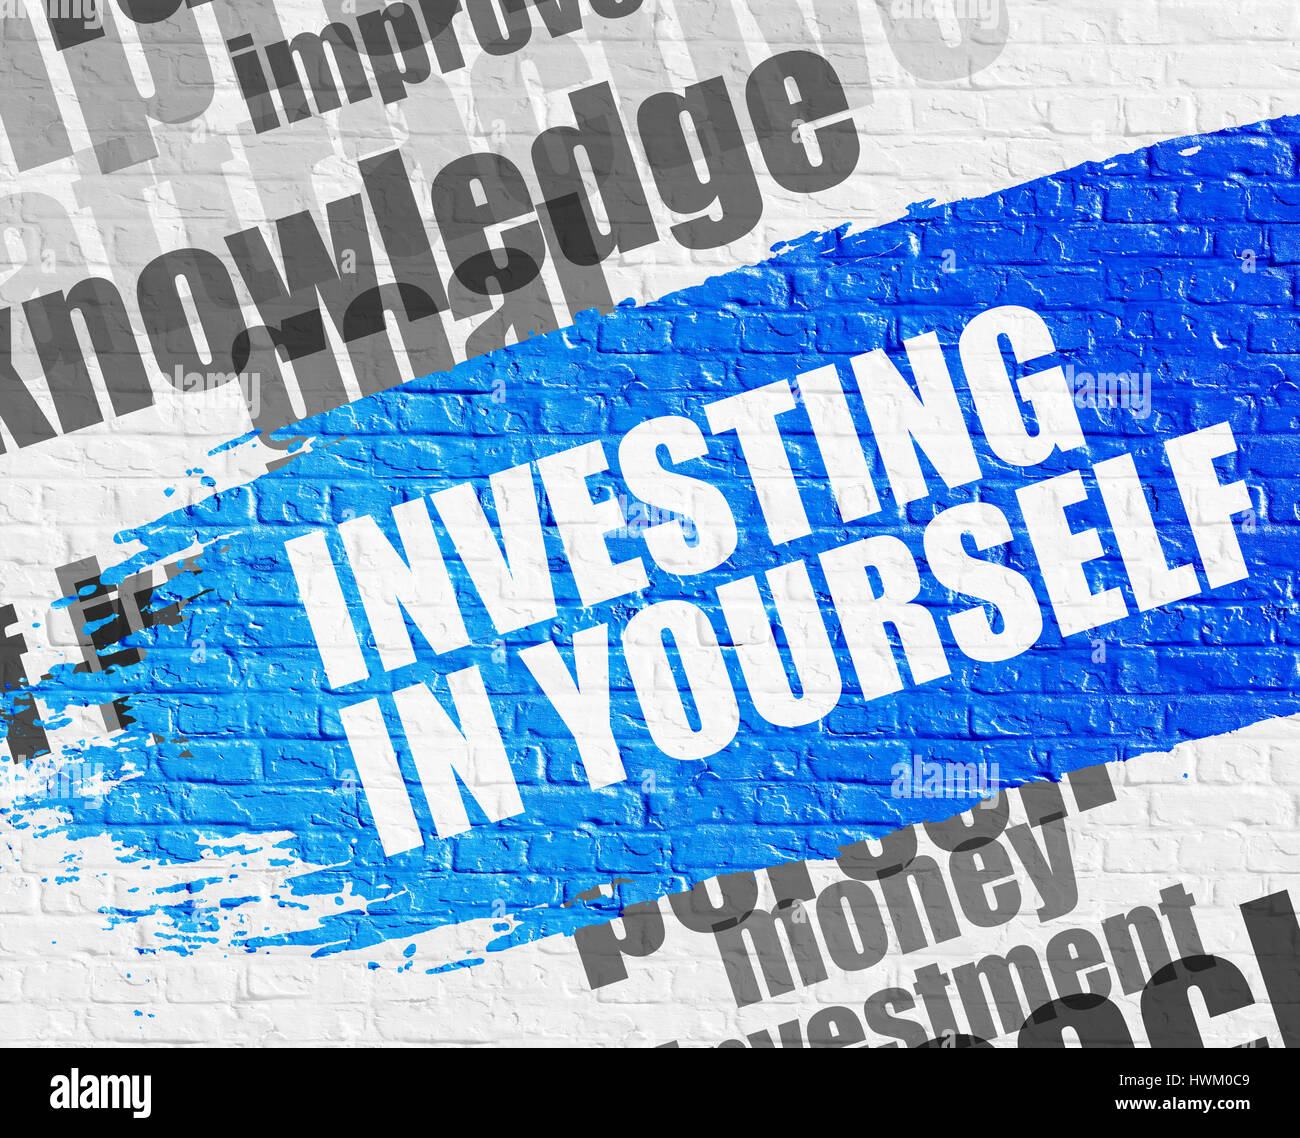 Investing In Yourself on the Brick Wall. Stock Photo